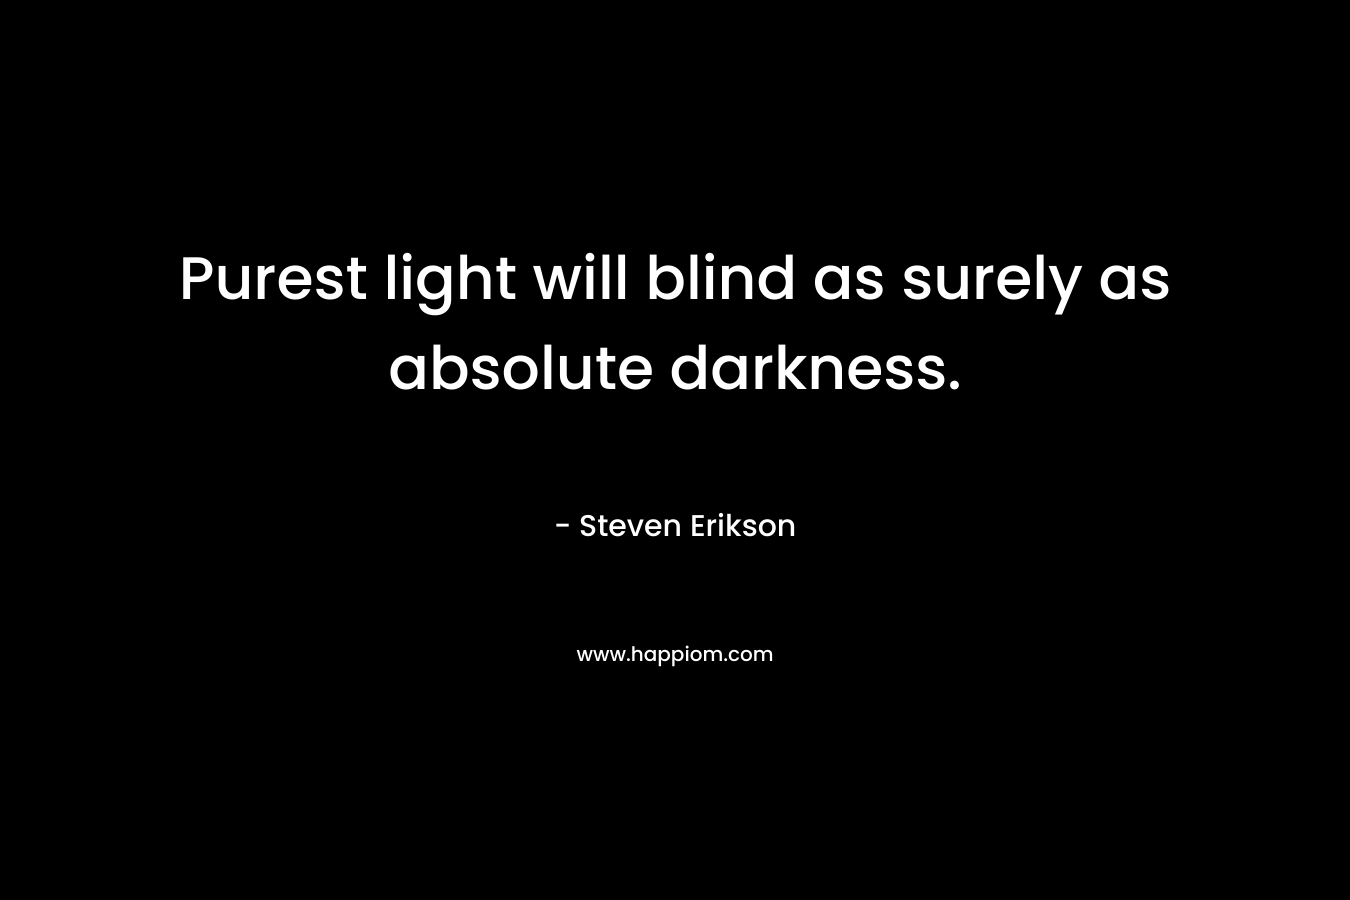 Purest light will blind as surely as absolute darkness. – Steven Erikson